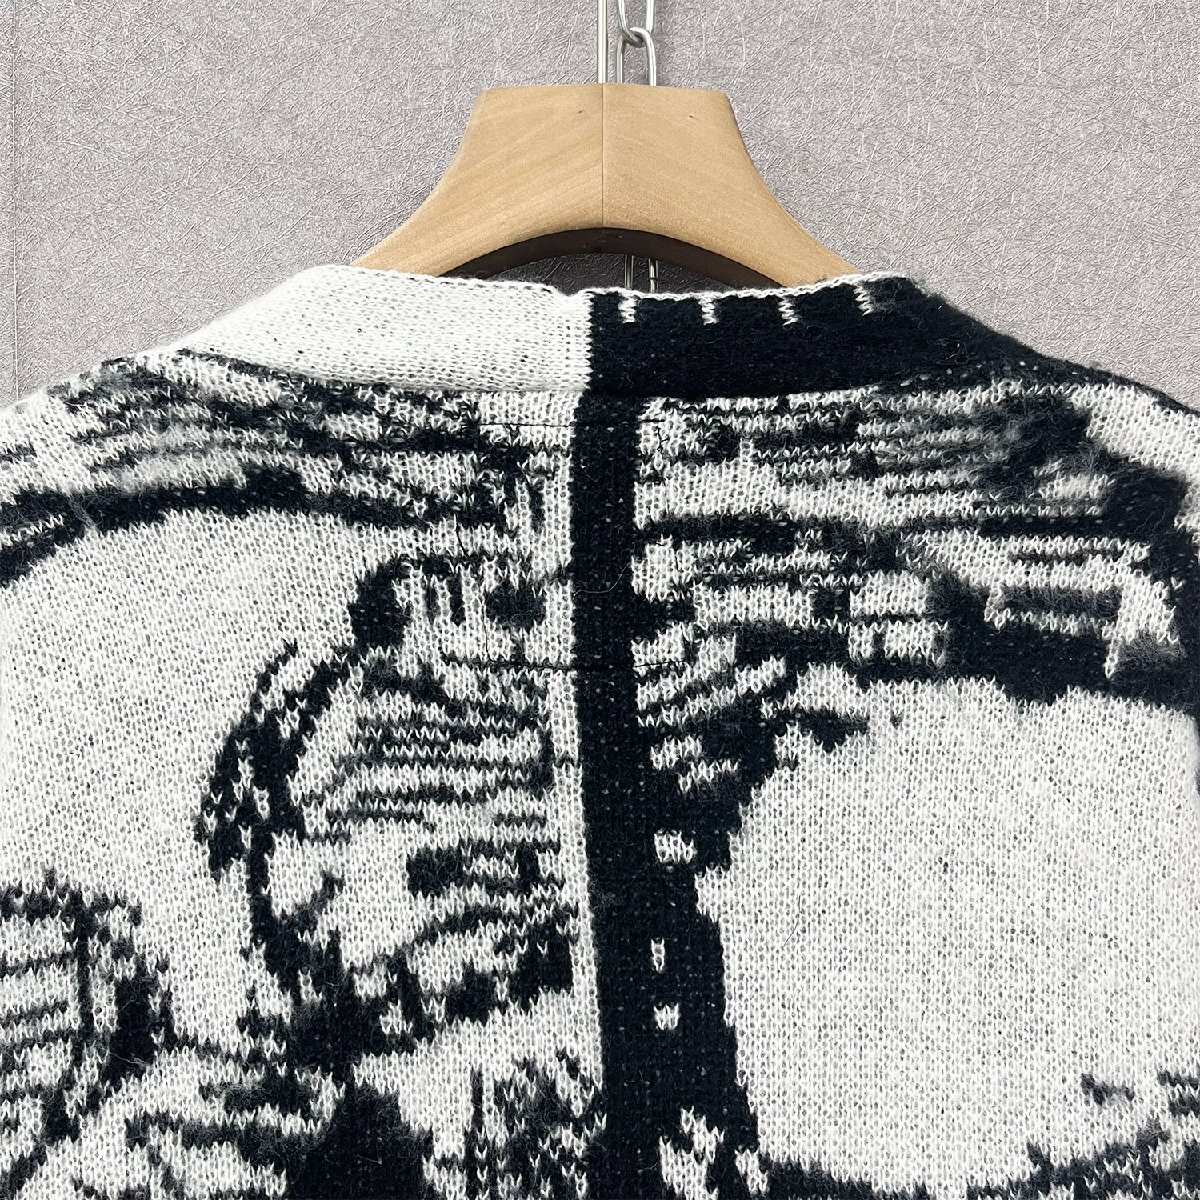  piece .* cardigan regular price 6 ten thousand *Emmauela* Italy * milano departure * high class wool . heat insulation easy big Silhouette total pattern knitted outer M/46